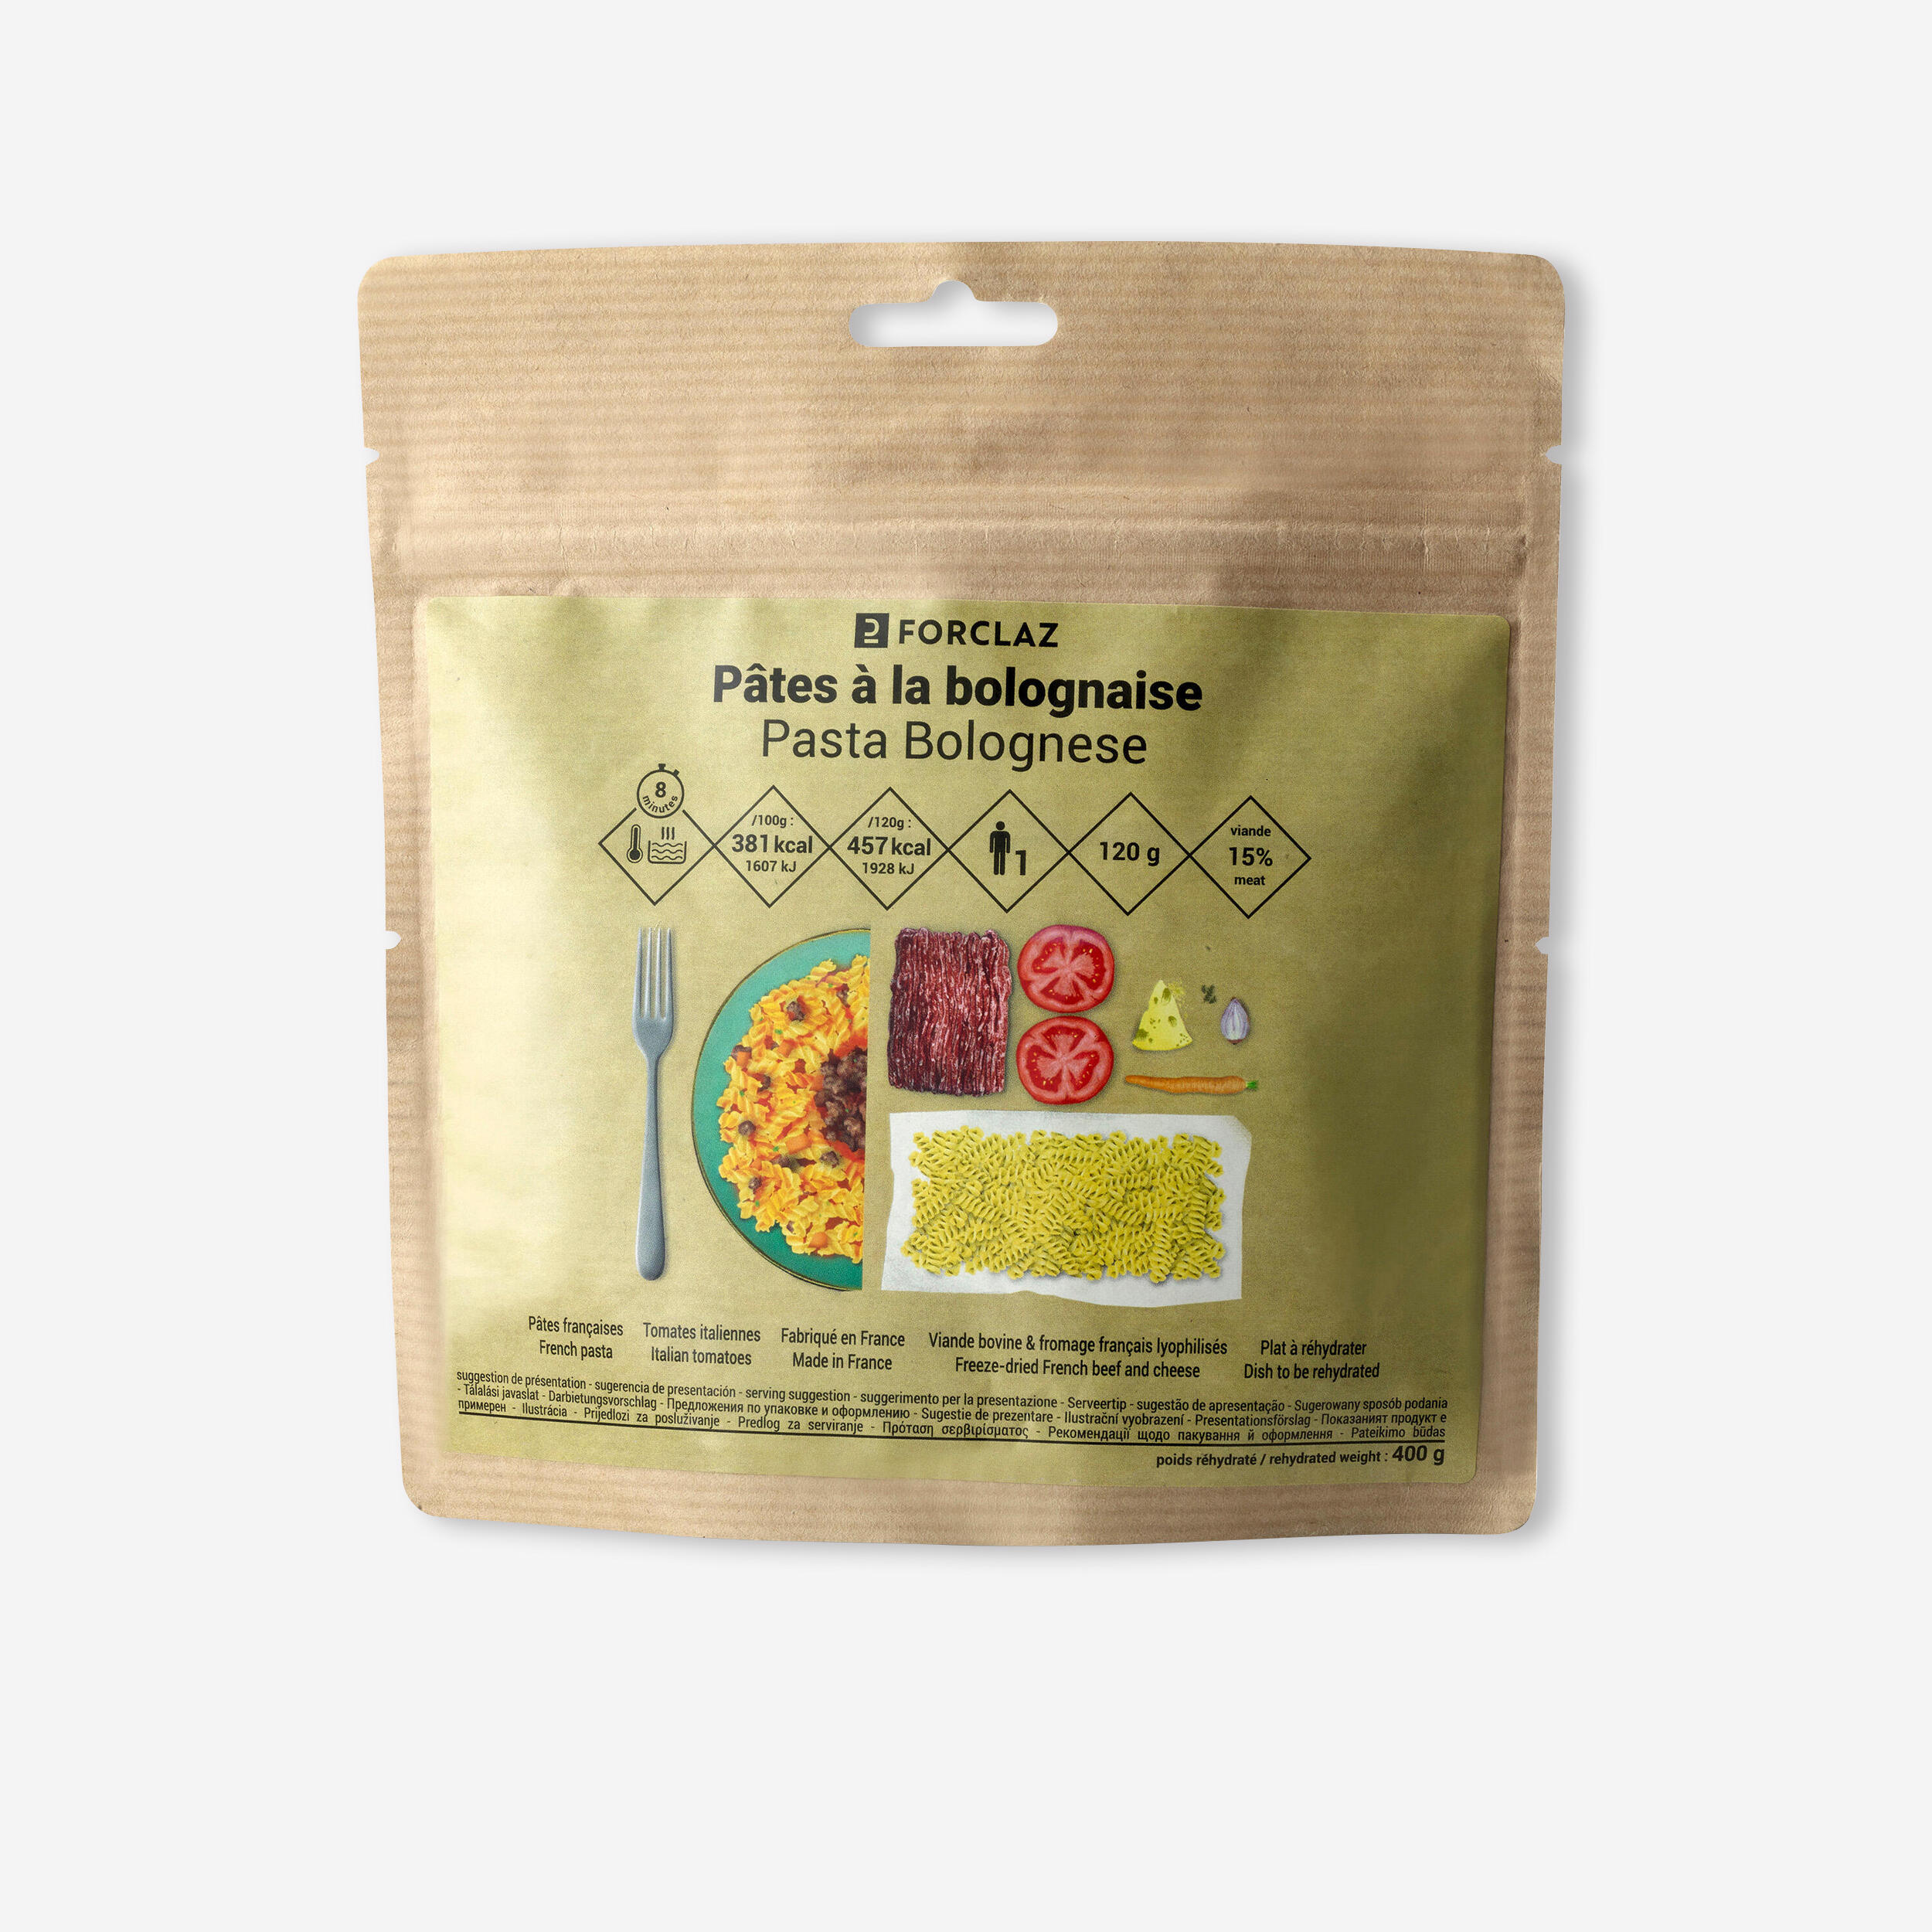 FORCLAZ Pasta Bolognese Dehydrated Meal - 120g